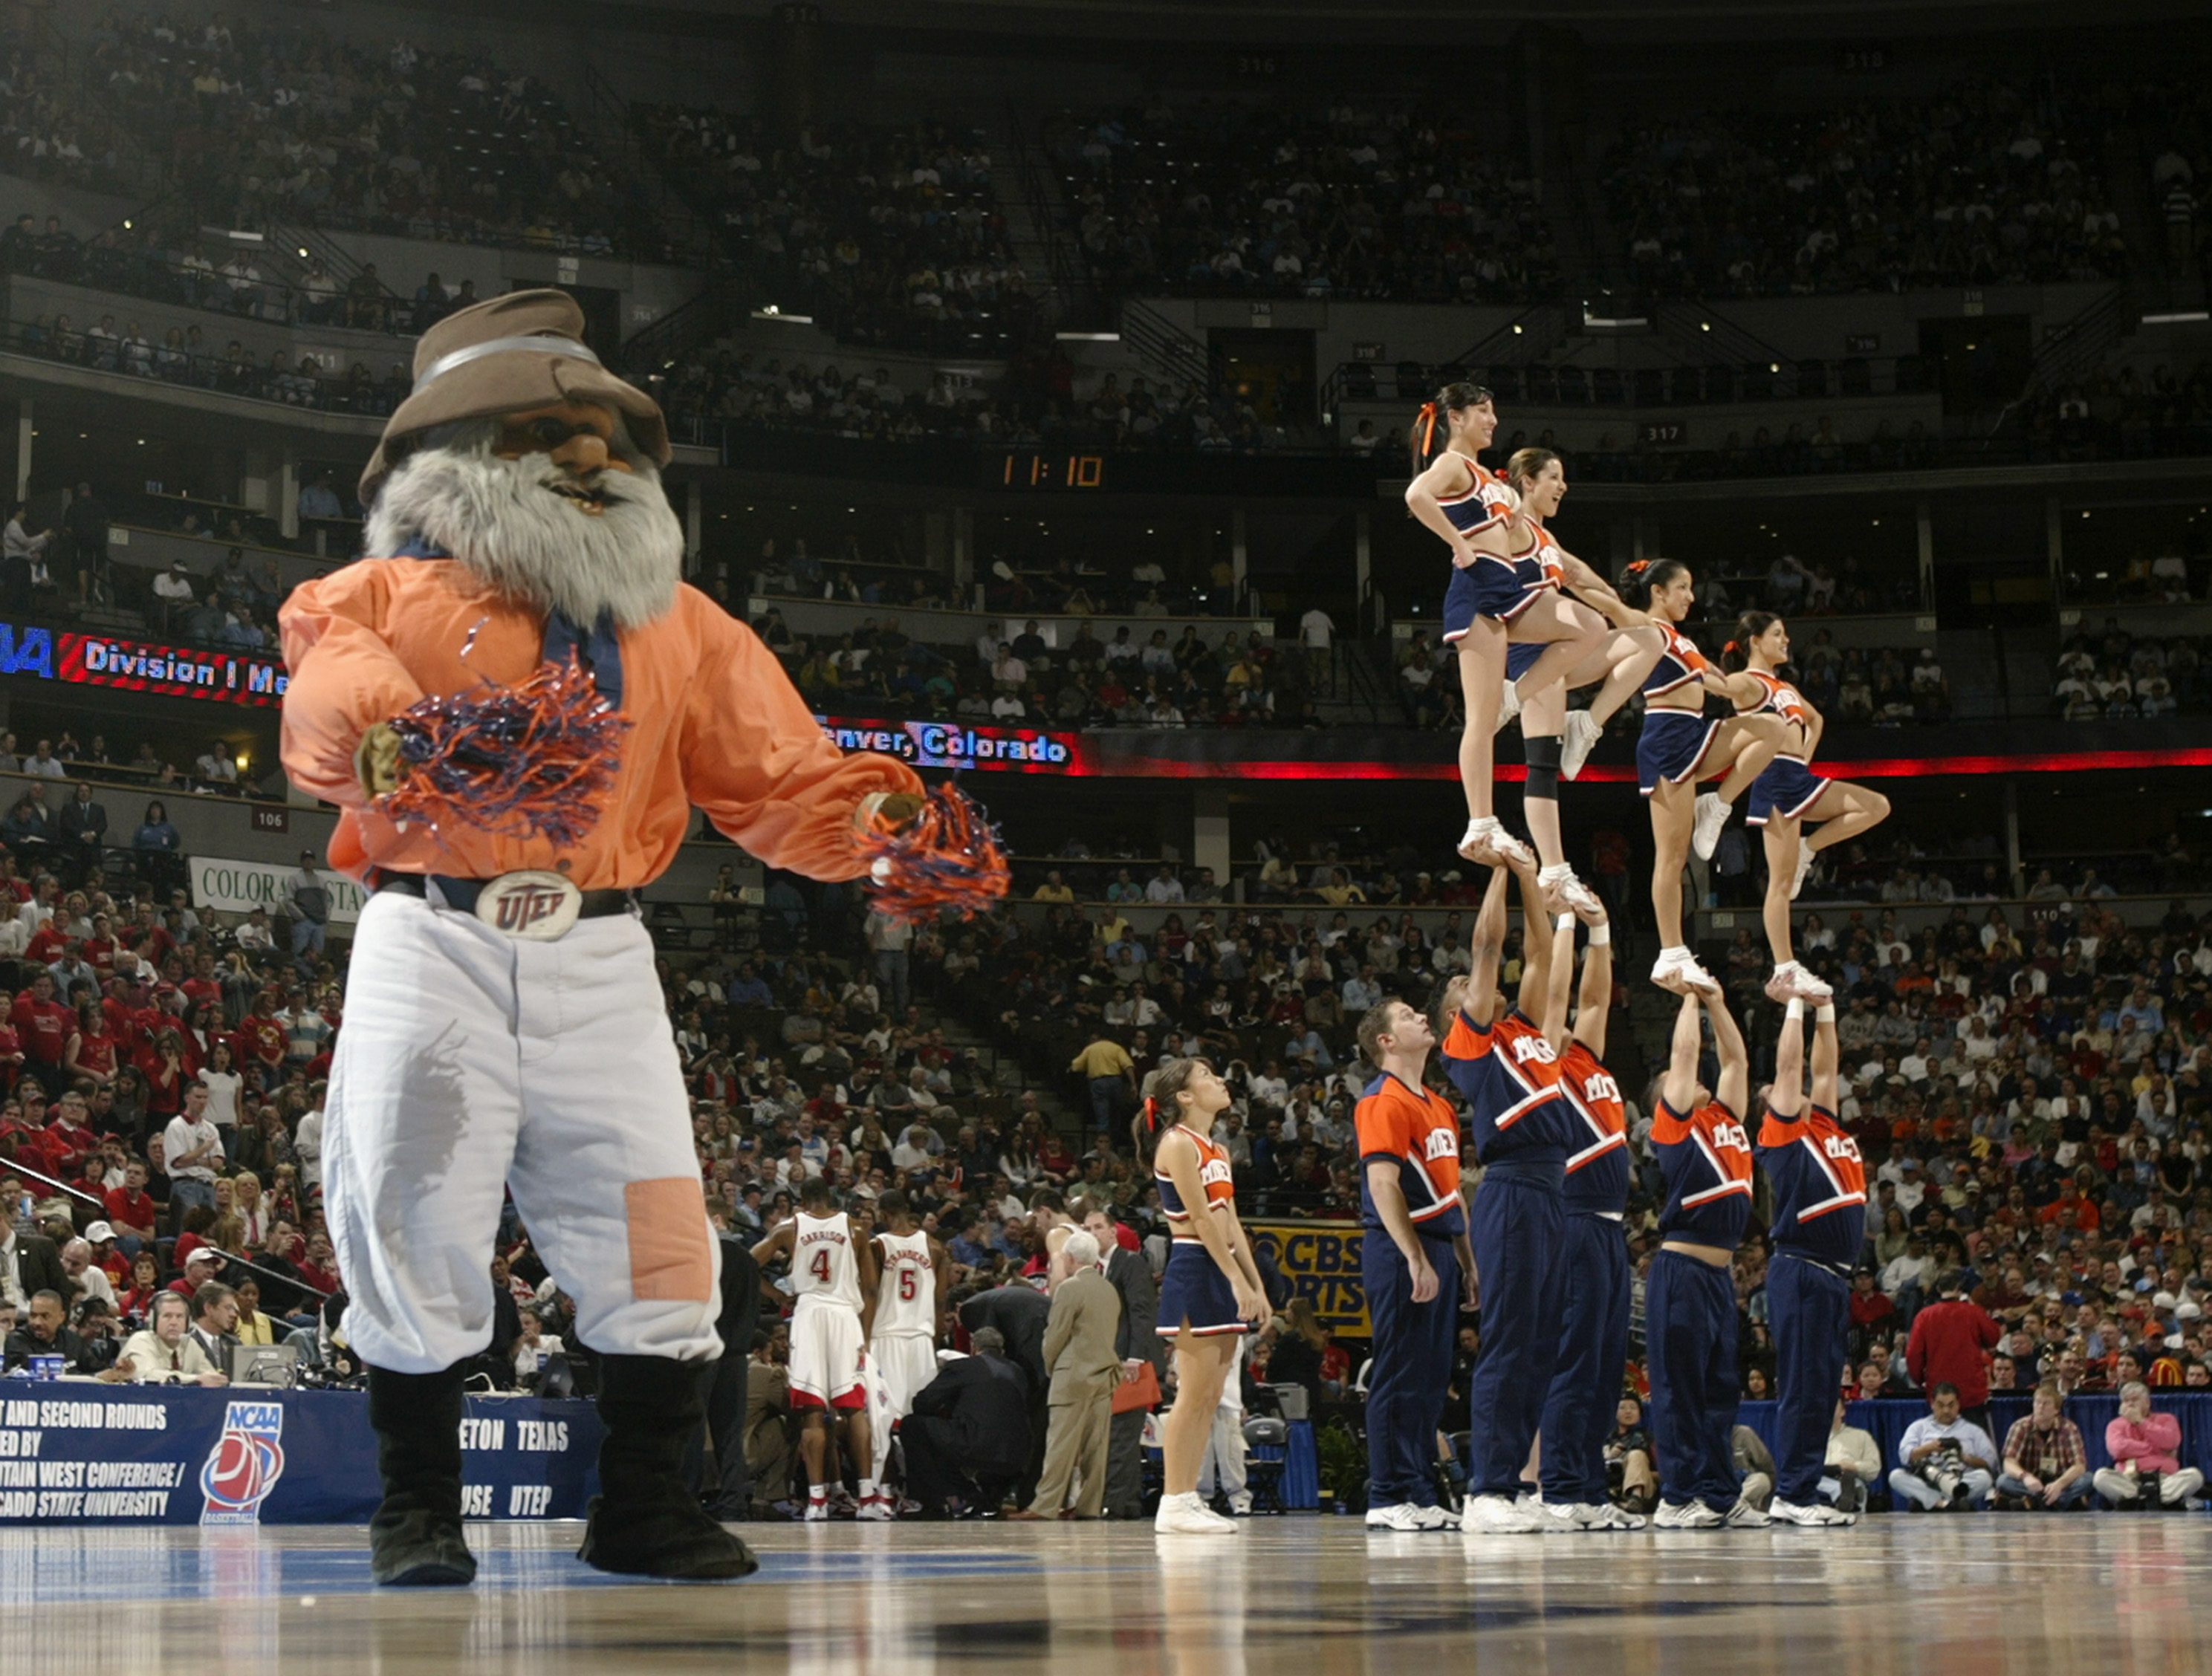 DENVER - MARCH 18:  The University of Texas El Paso Miners mascot and cheerleaders perform during the first round game of the NCAA Division I Men's Basketball Tournament against the Maryland Terrapins at the Pepsi Center on March 18, 2004 in Denver, Color